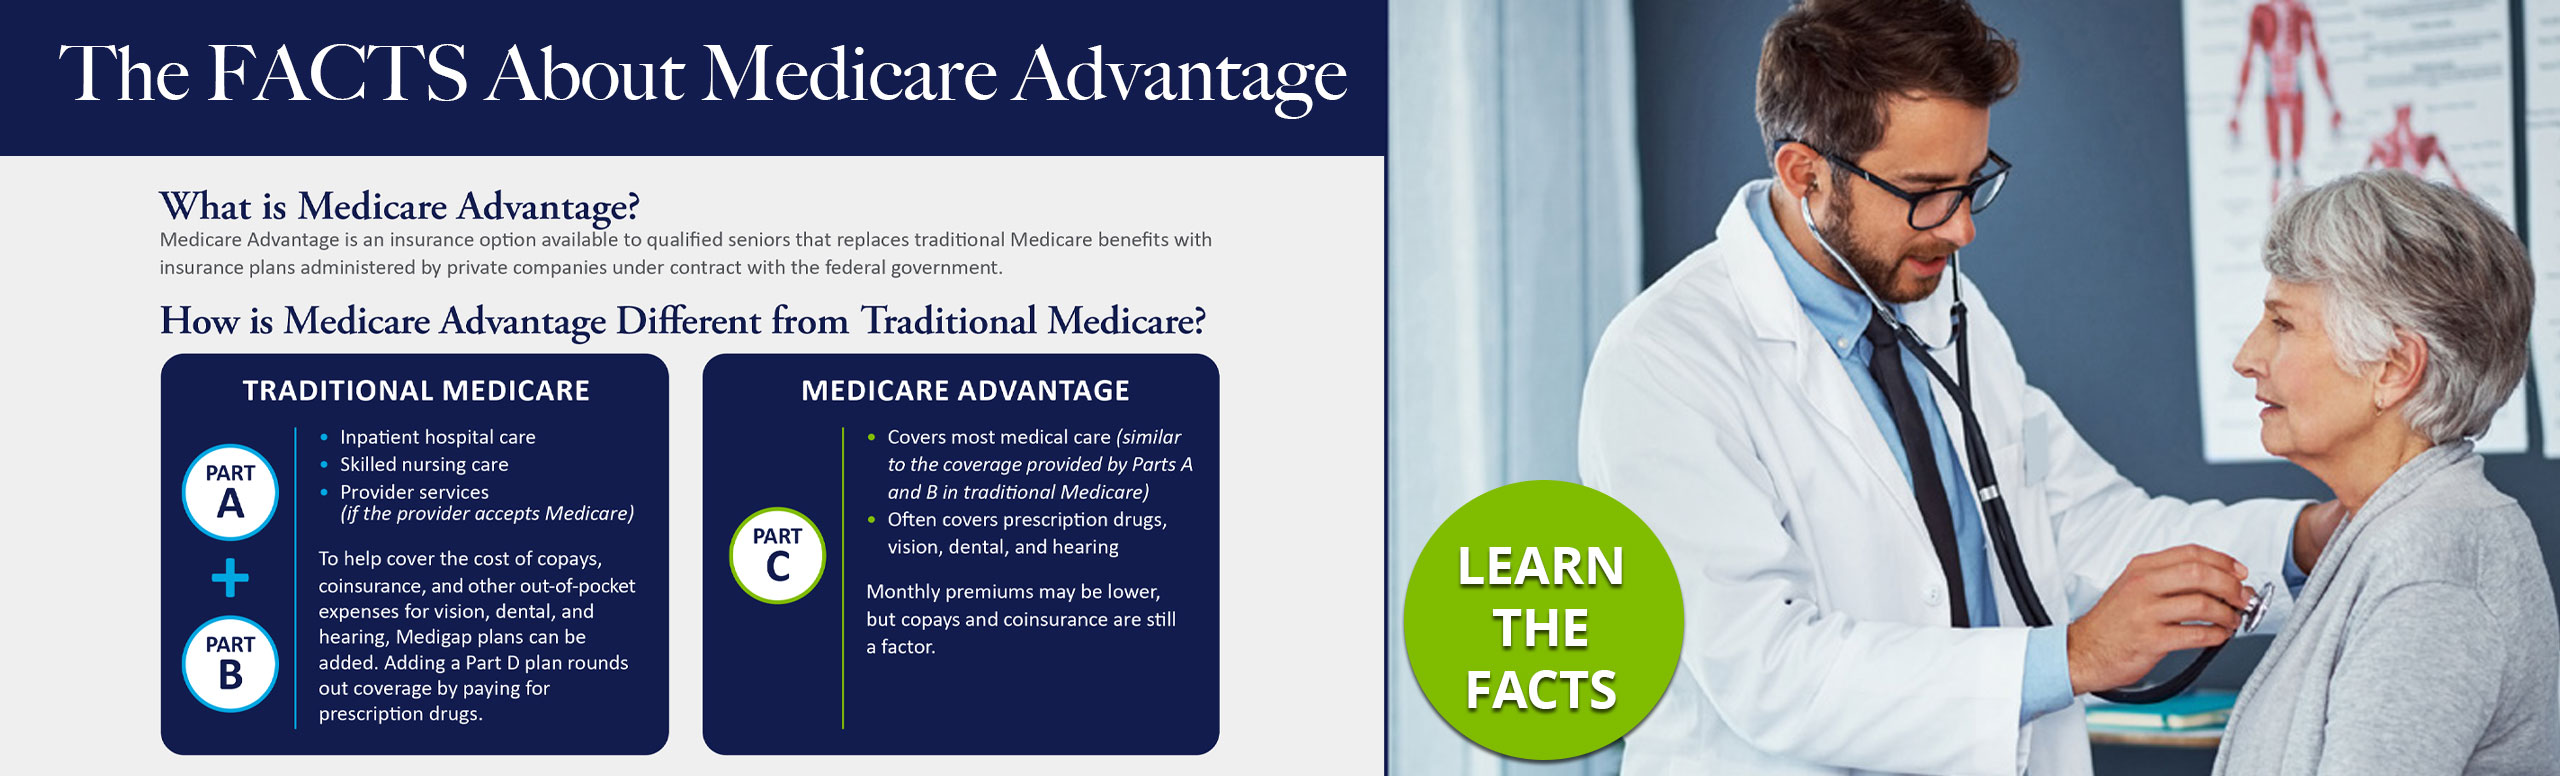 Learn the Facts about Medicare Advantage